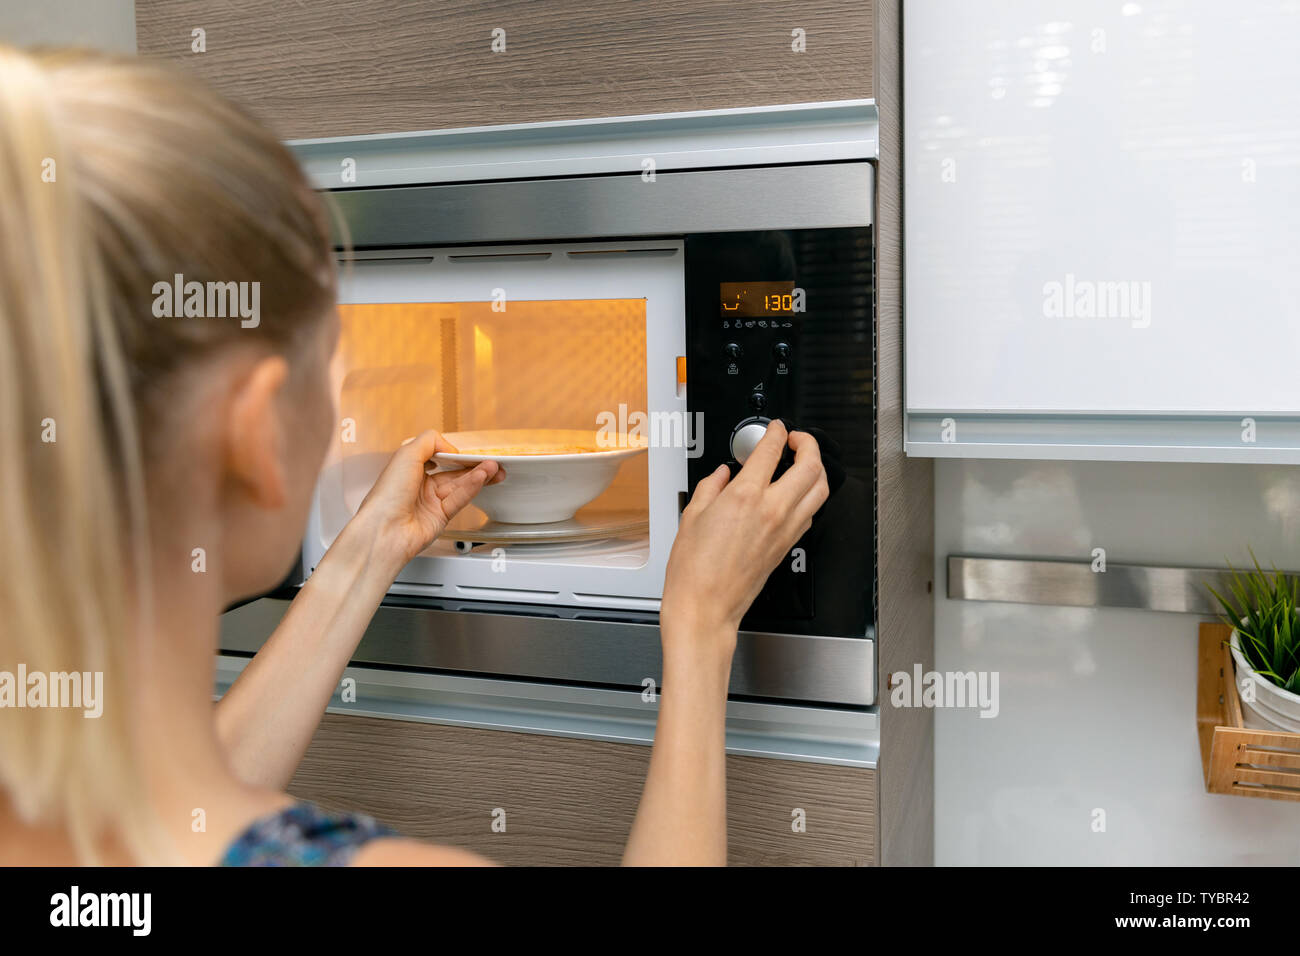 woman warm up the food in microwave oven at home Stock Photo